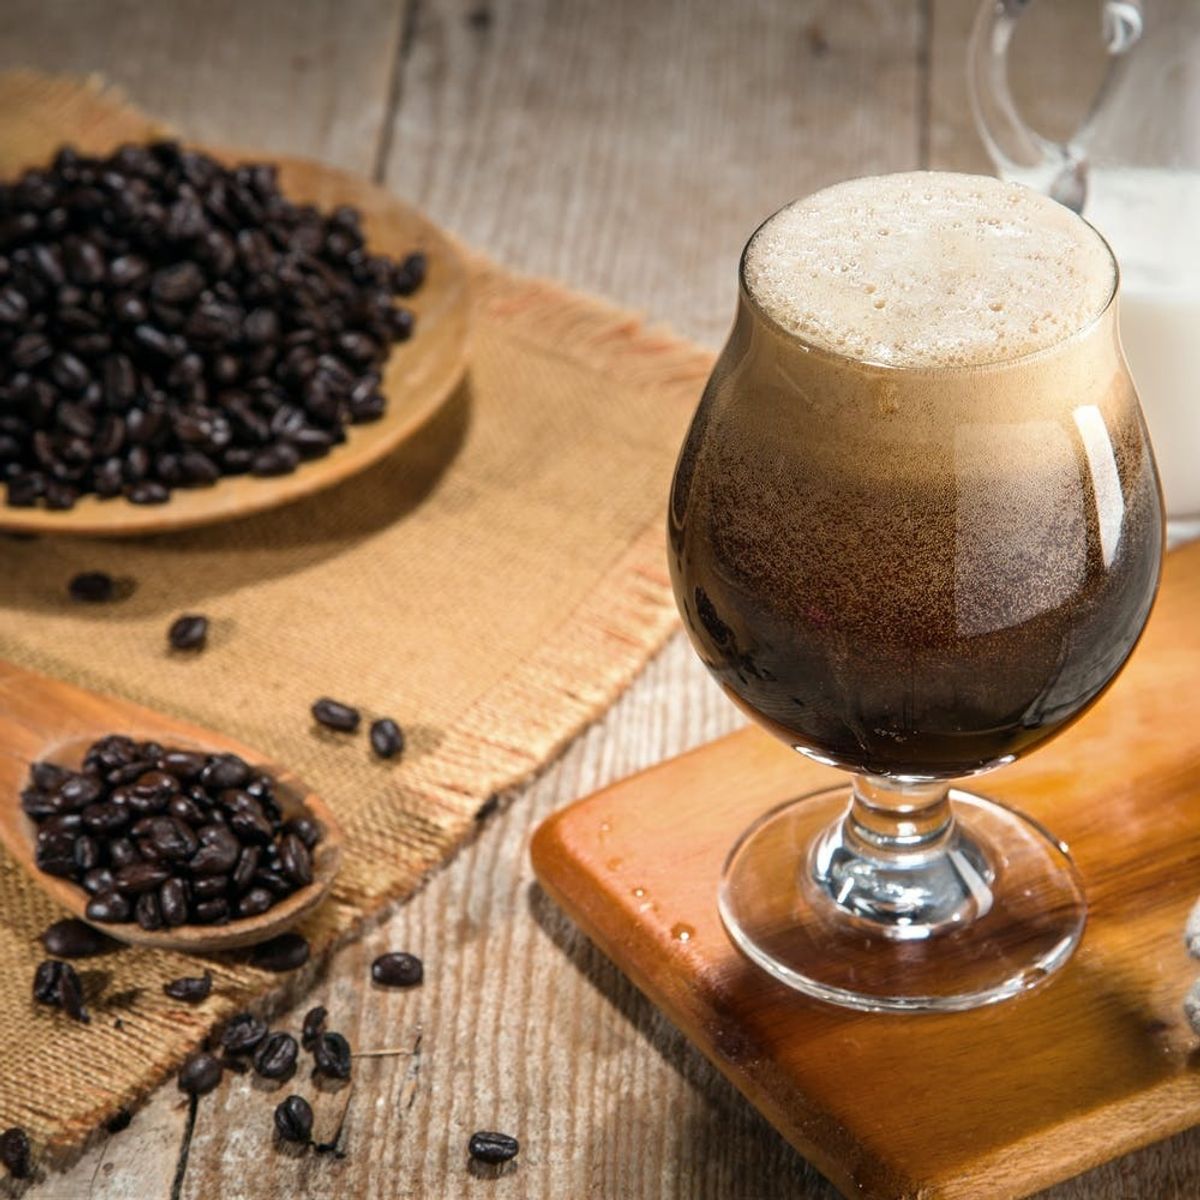 Why Nitro Coffee Could Be the Healthy Buzz You’re Looking For